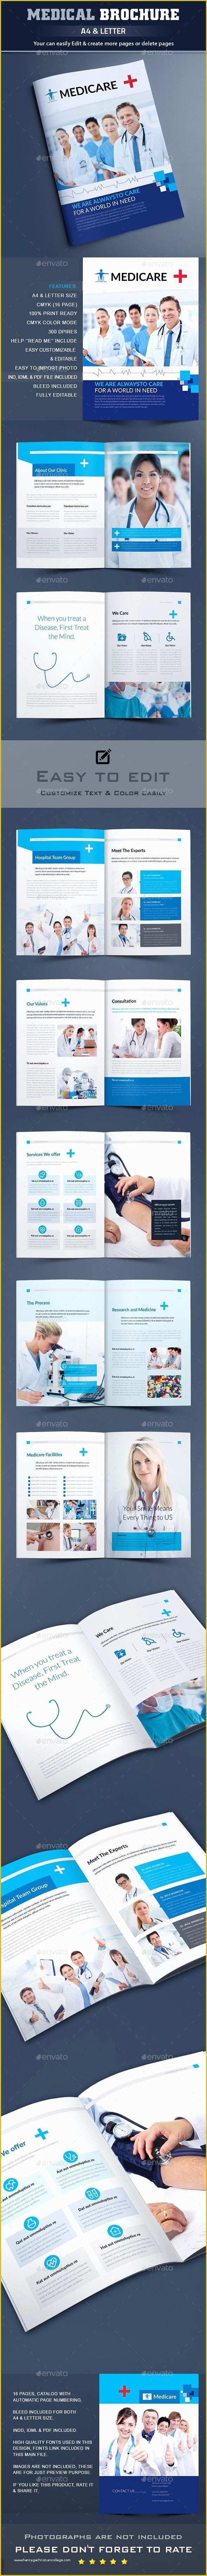 A5 Size Brochure Templates Psd Free Download Of Medical Brochure Template Psd – 16 Unique Pages A4 & Us